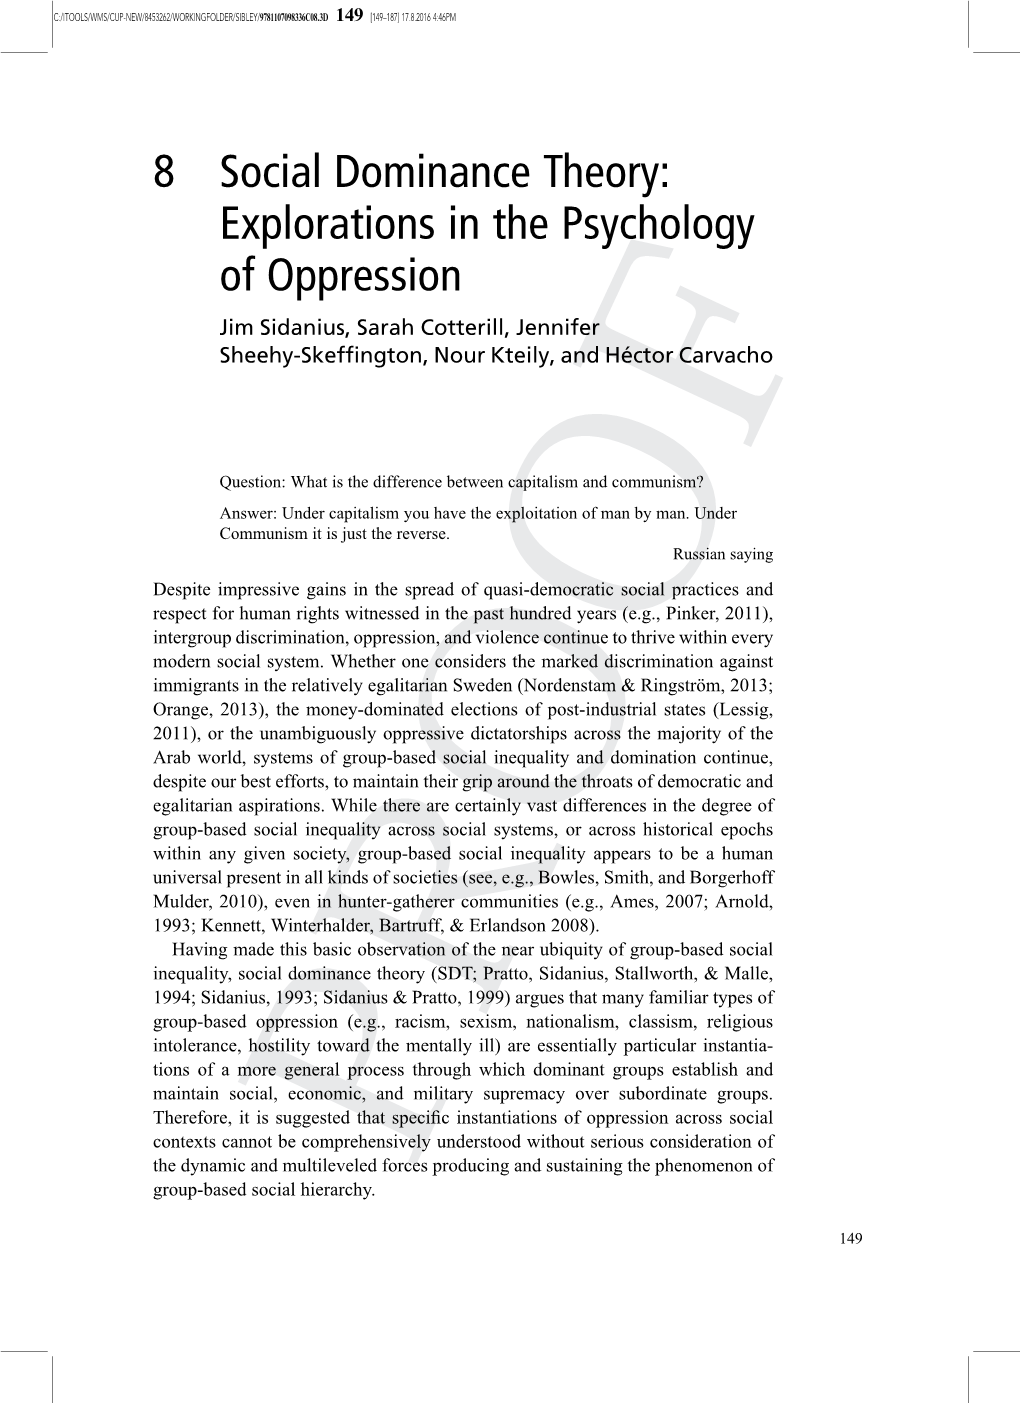 8 Social Dominance Theory: Explorations in the Psychology of Oppression Jim Sidanius, Sarah Cotterill, Jennifer Sheehy-Skefﬁngton, Nour Kteily, and Héctor Carvacho